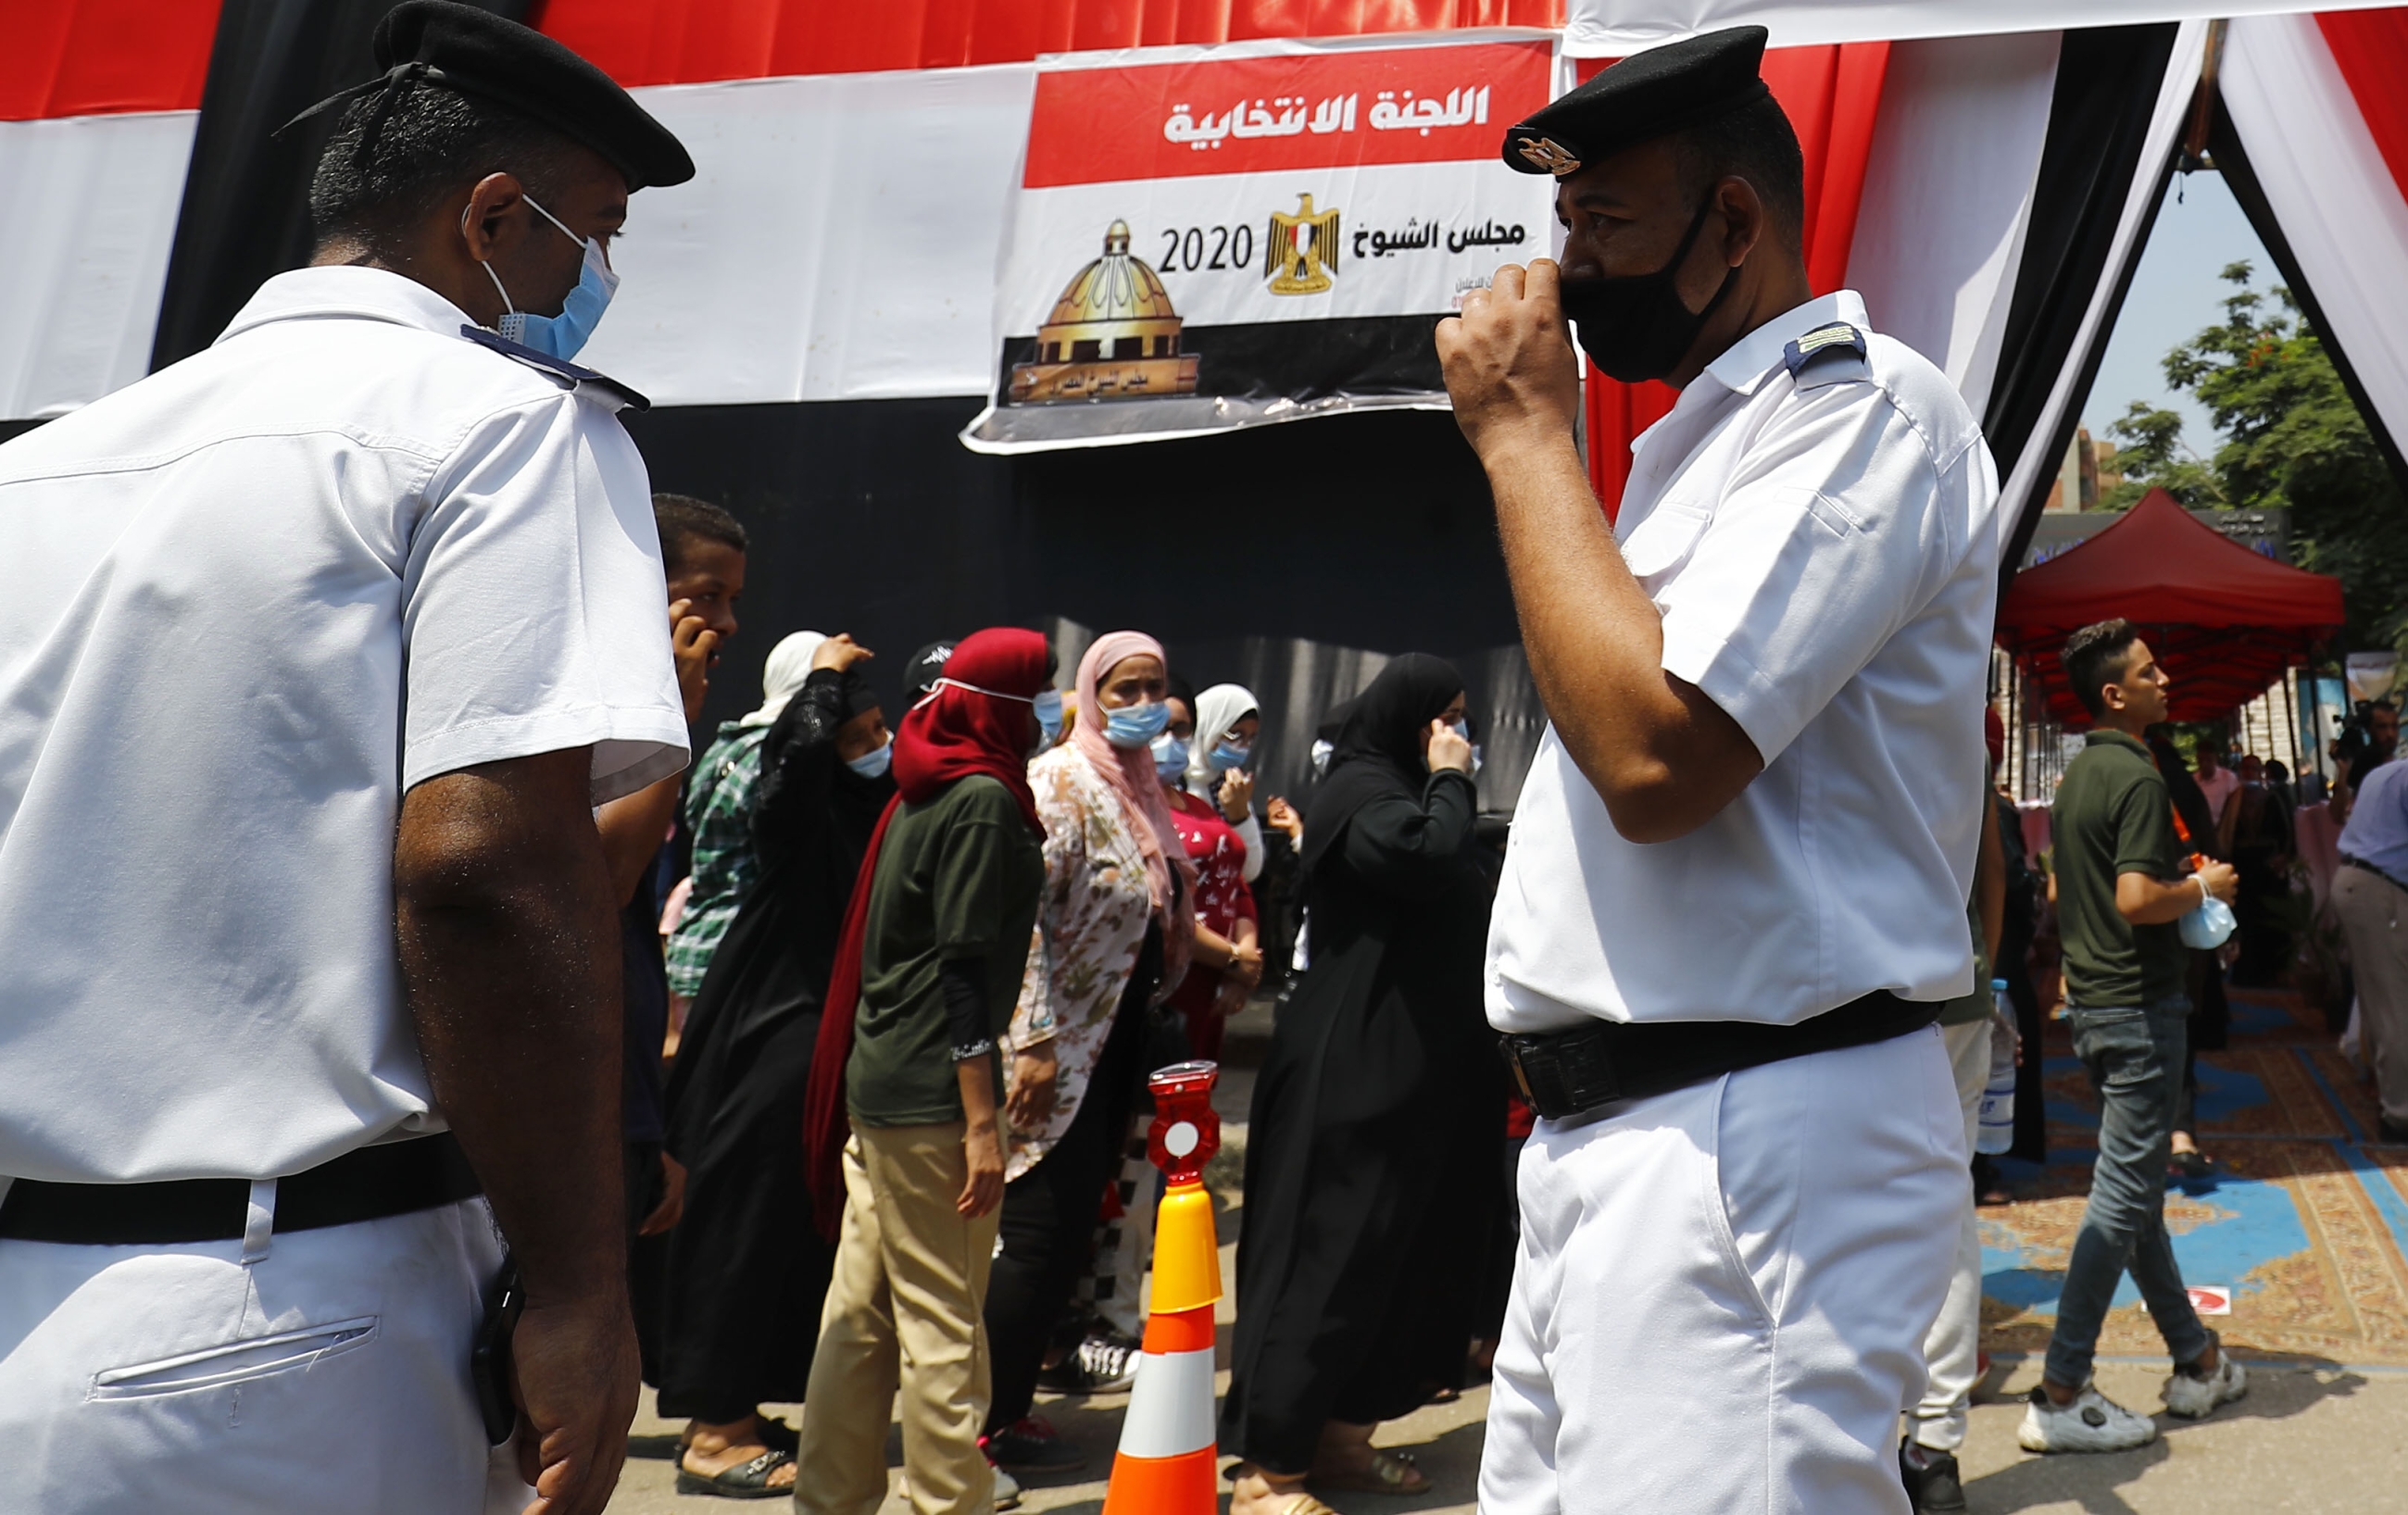 Egyptians queue up outside a polling station on August 11, 2020